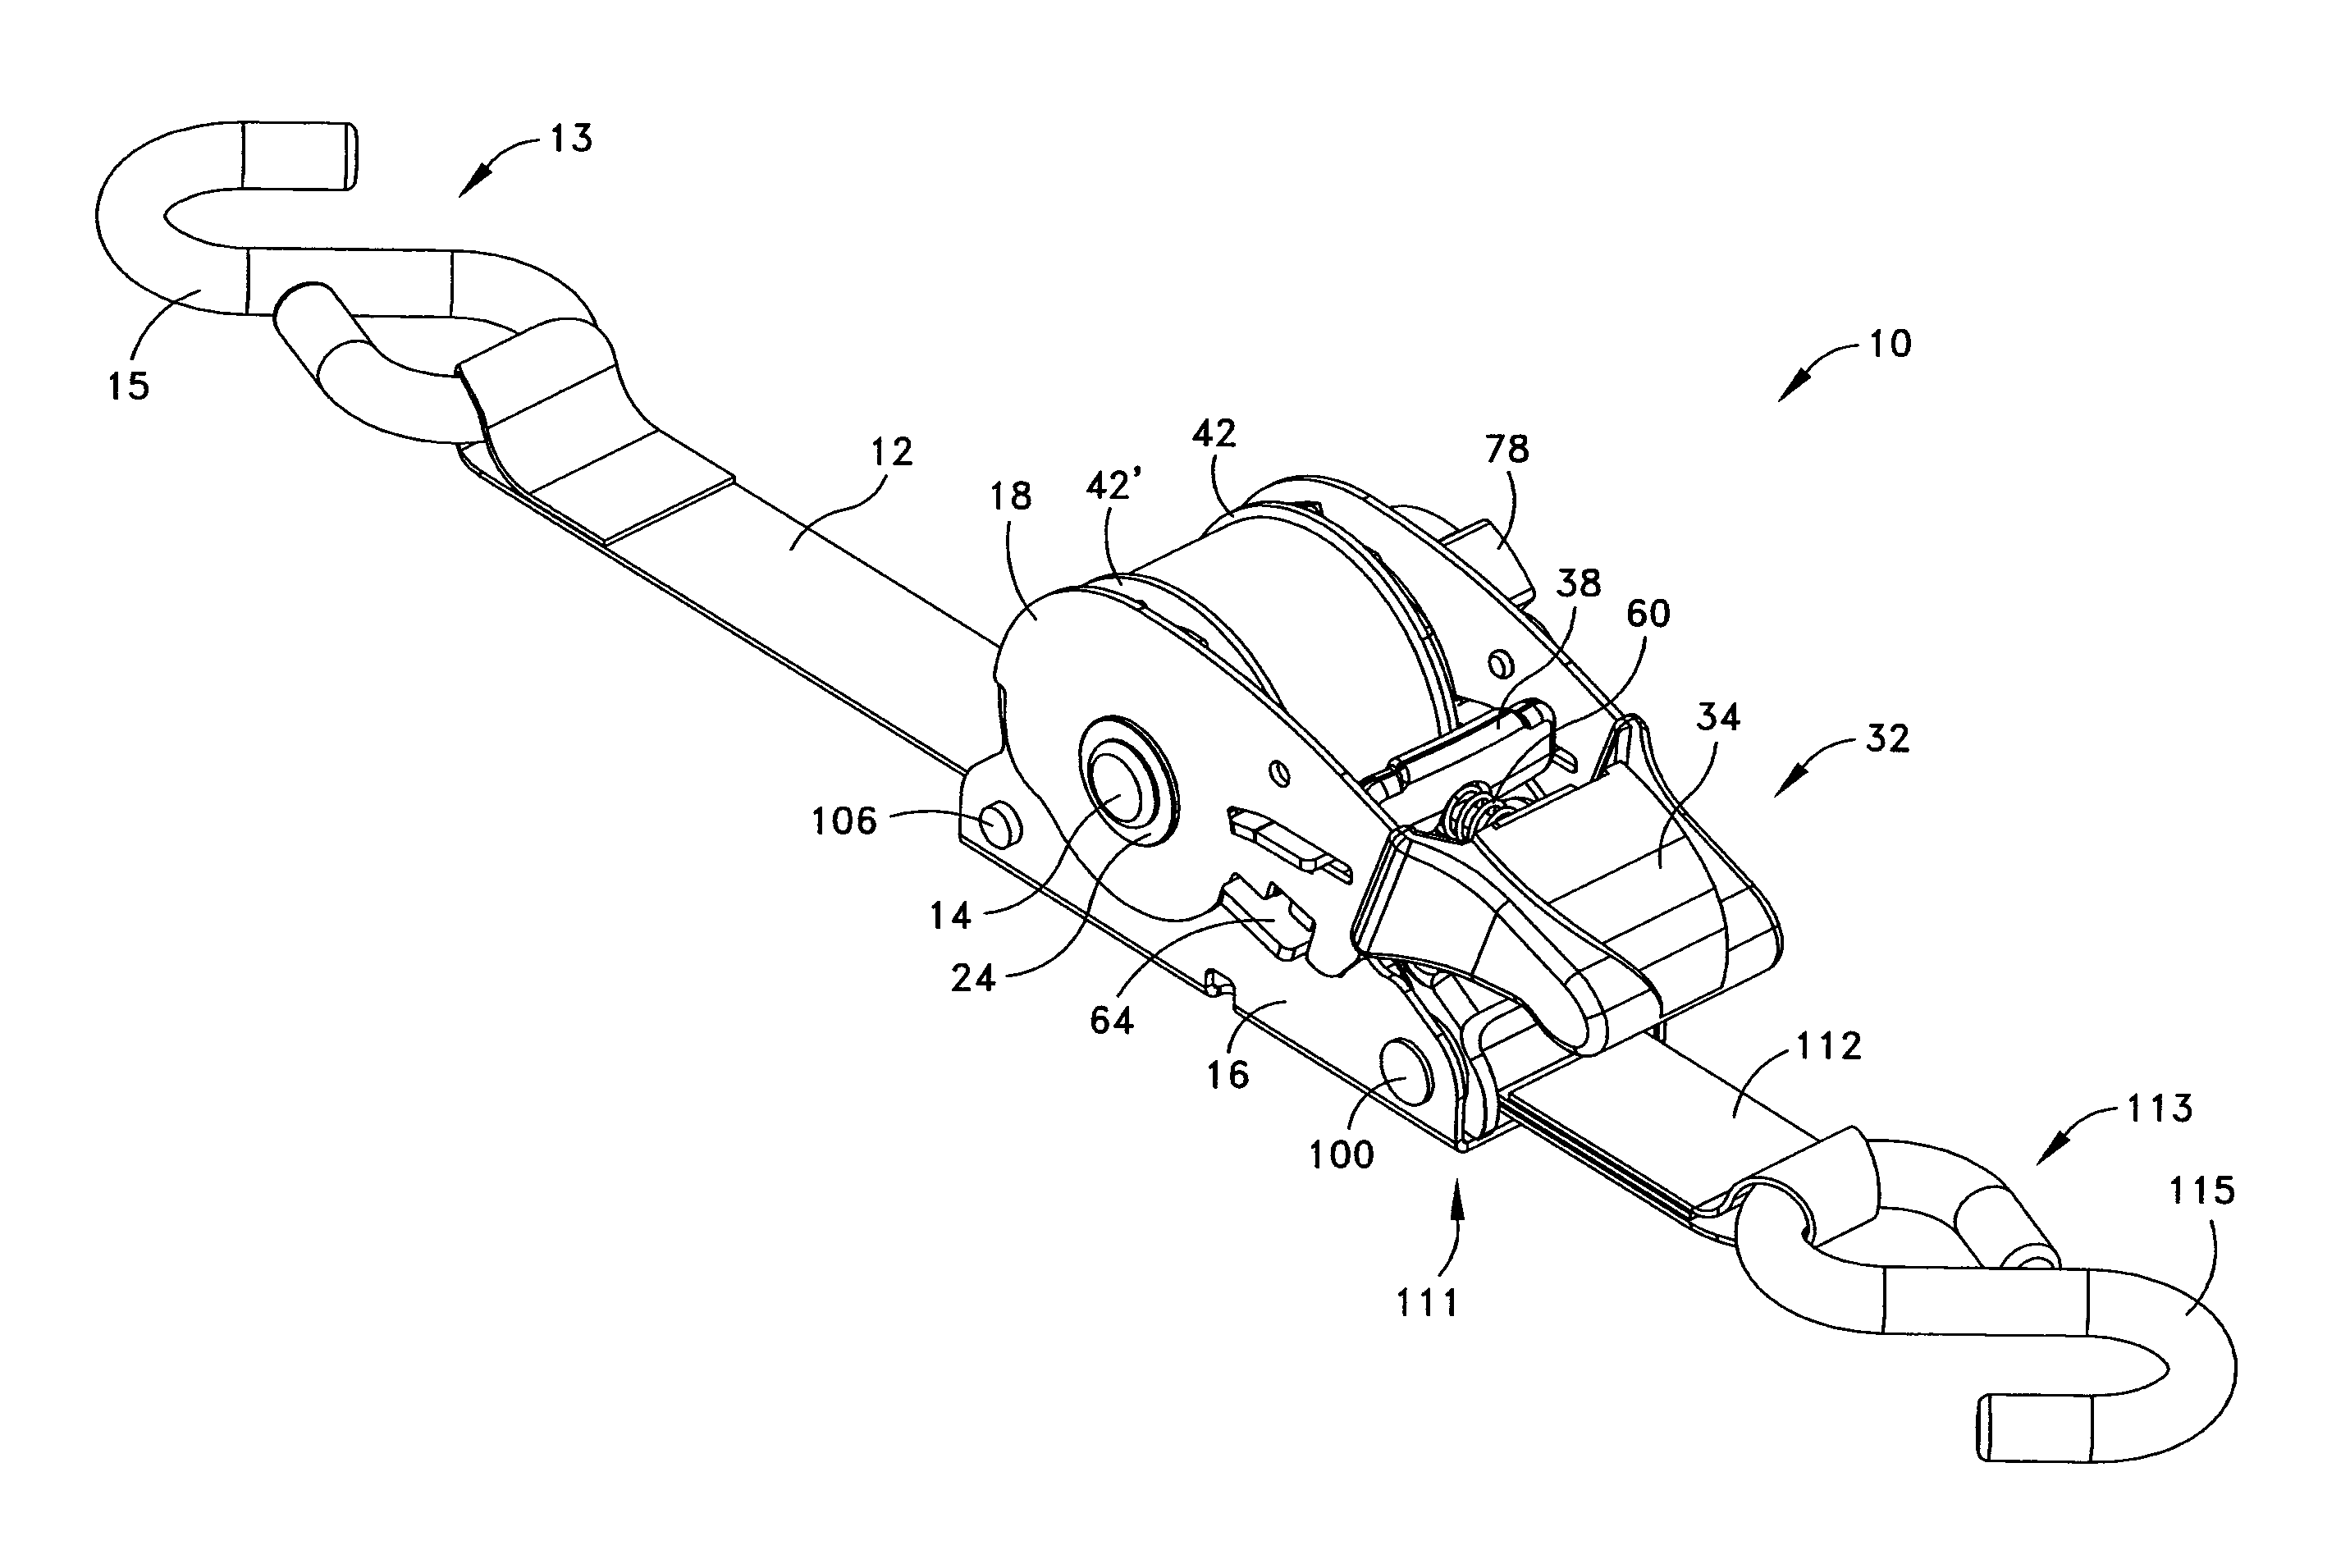 Retractable self-contained tie-down